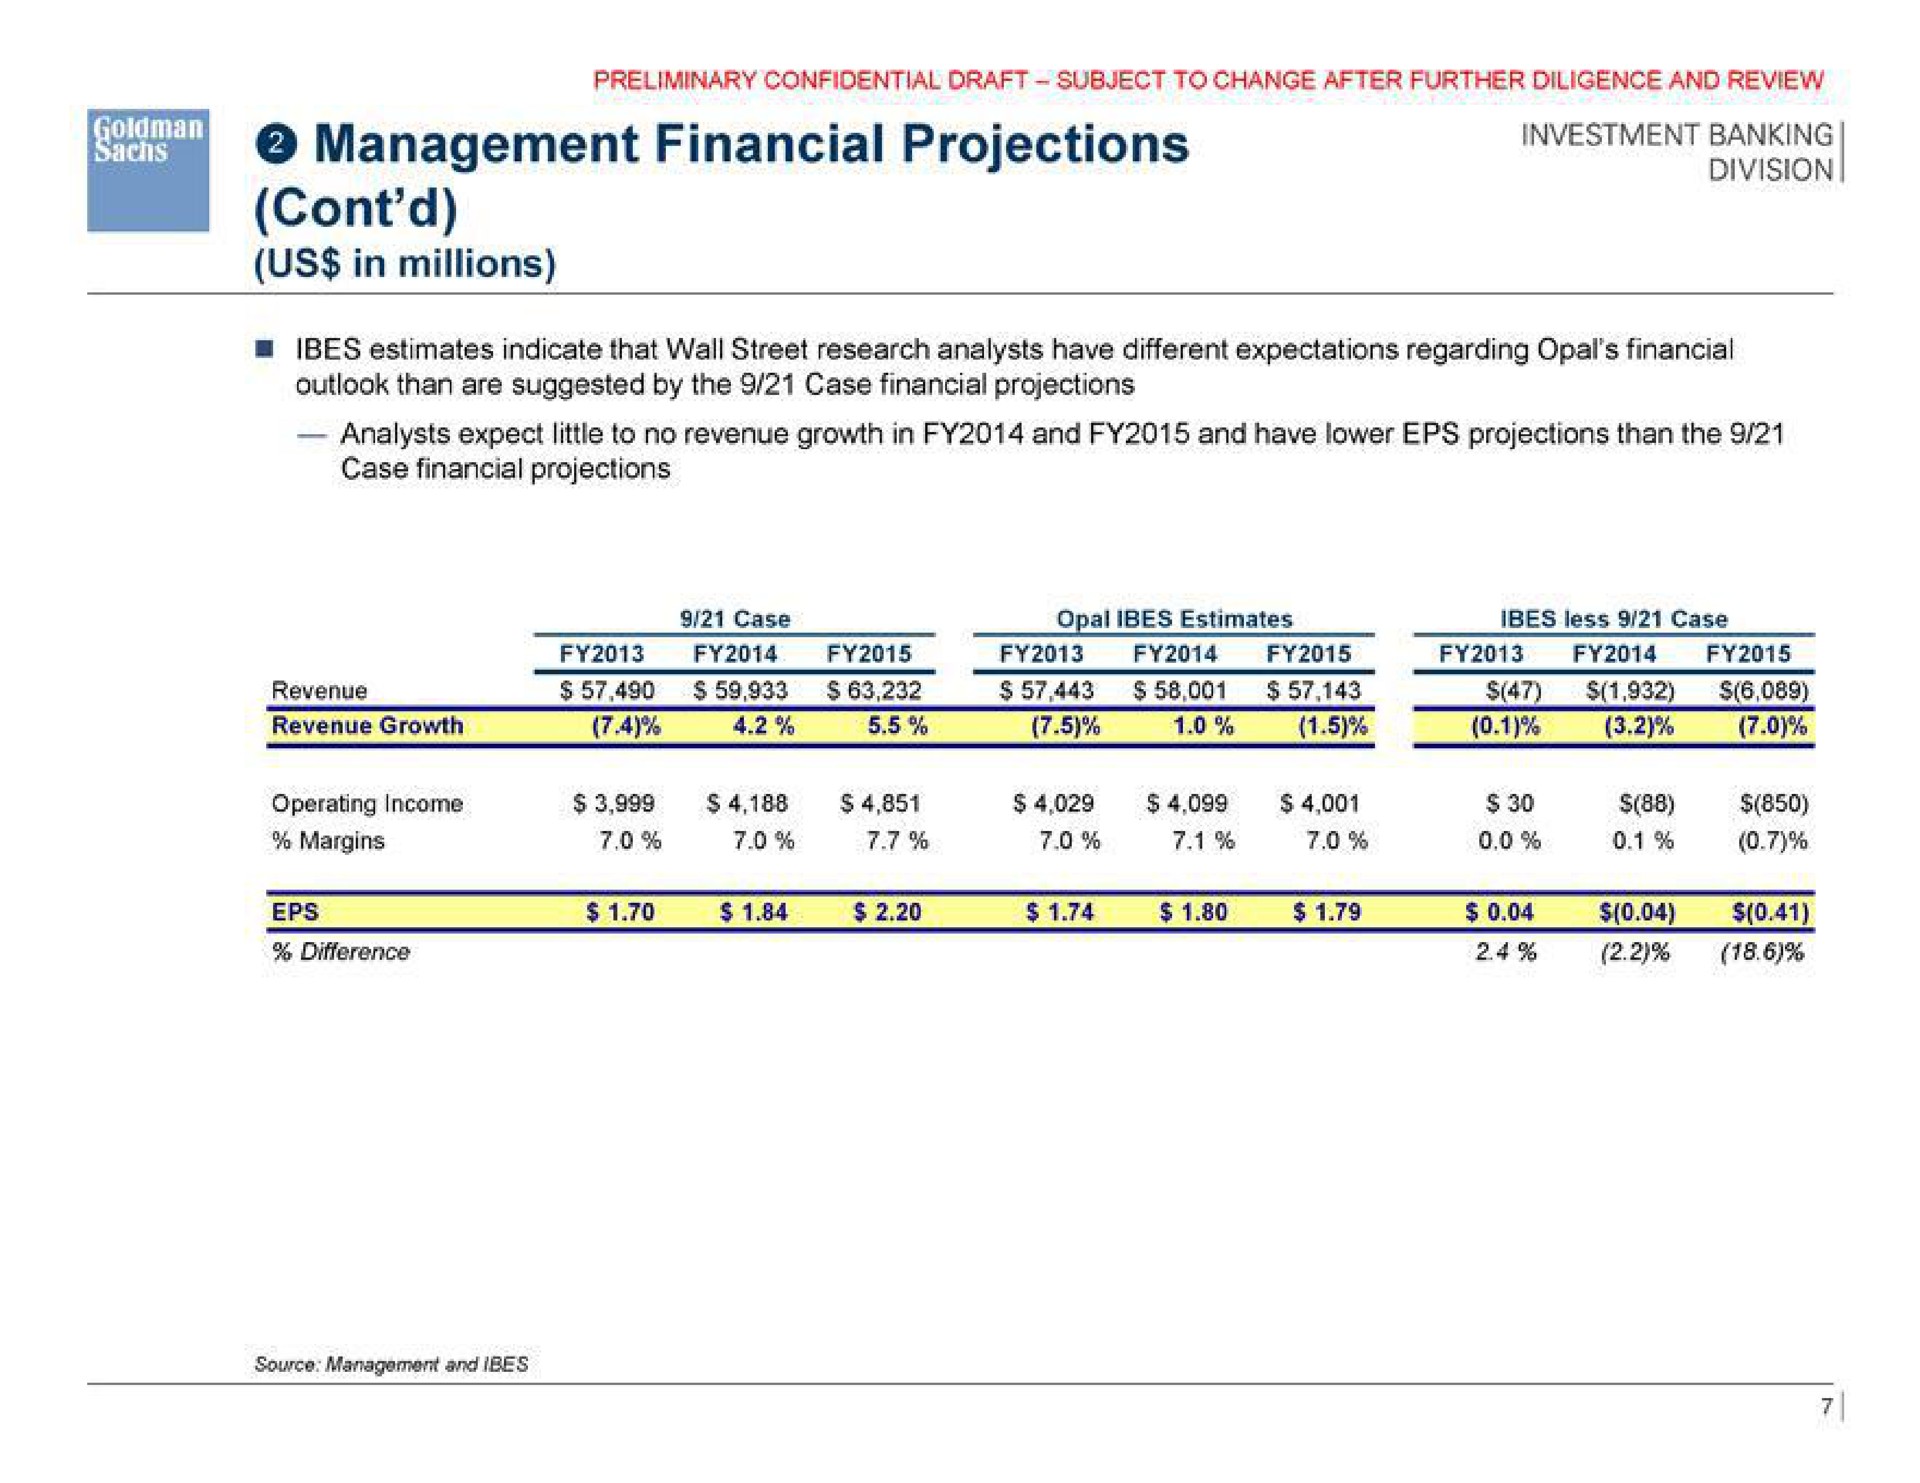 management financial projections us in millions | Goldman Sachs